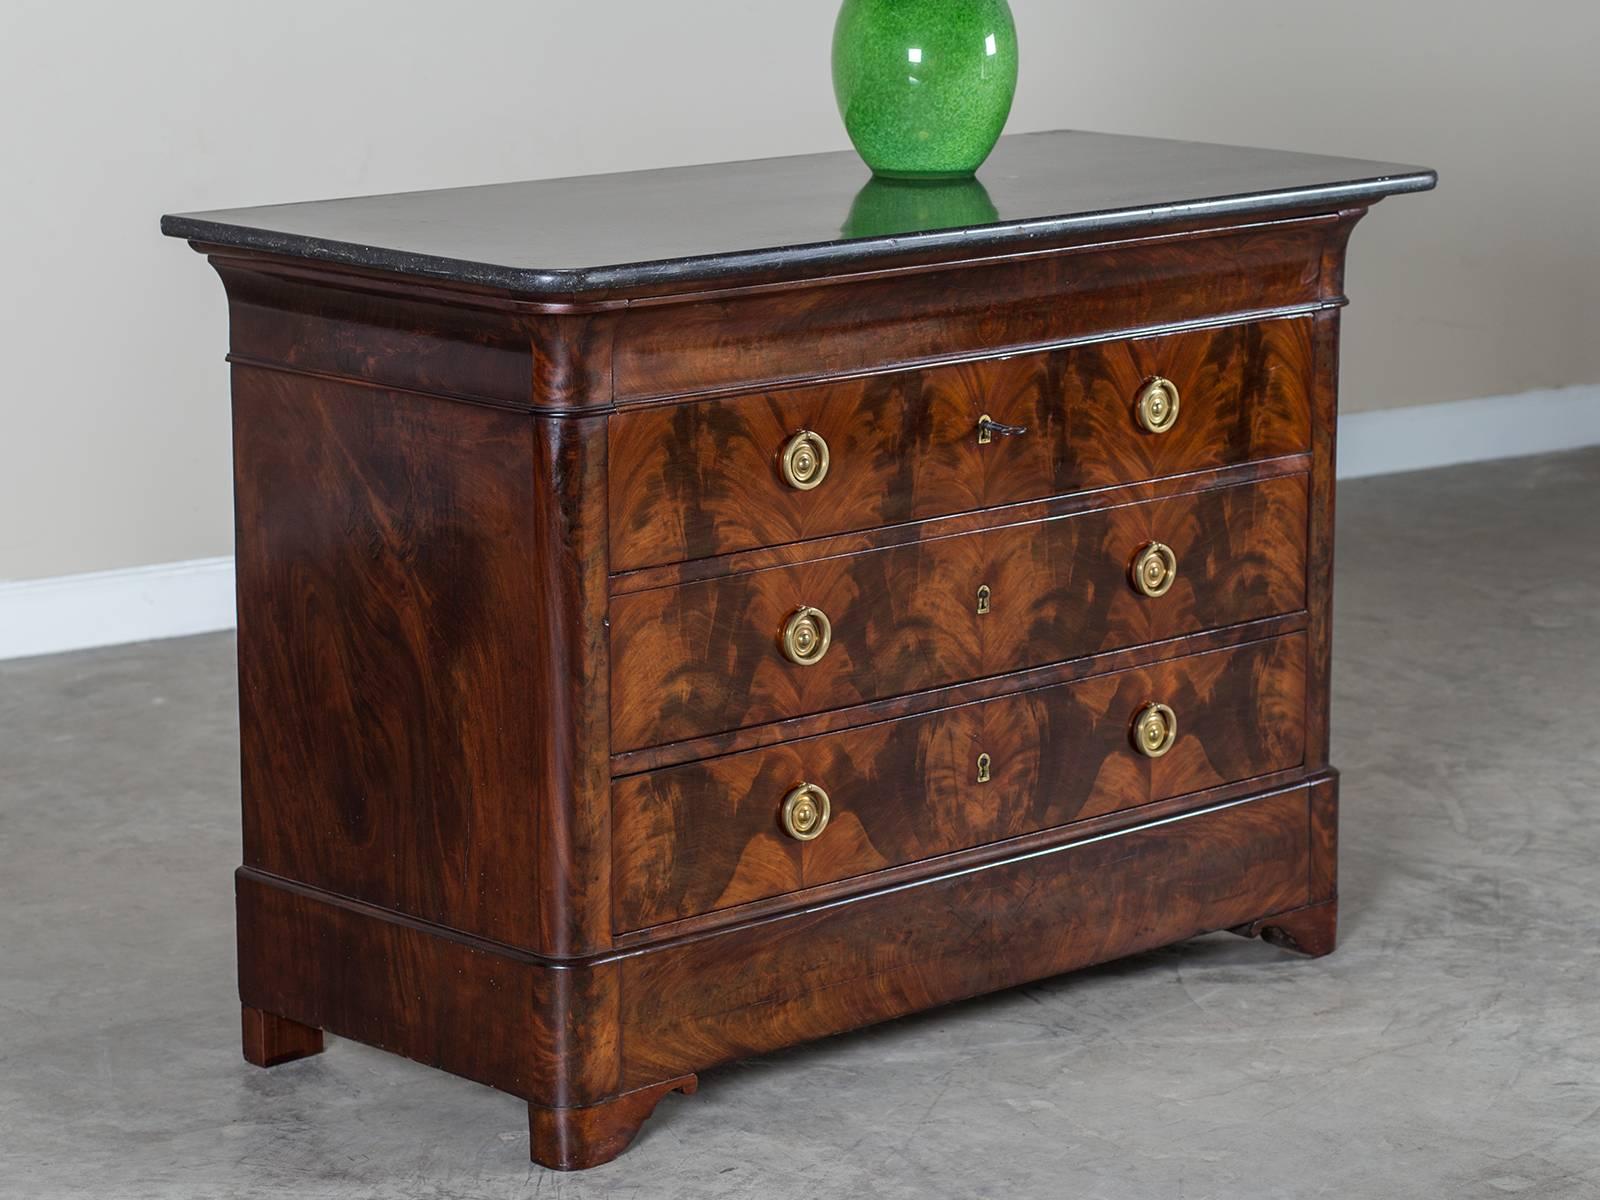 The simple elegant lines of this antique French chest are quite contemporary and make it suitable for many interiors. The amazing pattern of the mahogany grain is featured across the entire façade so it appears in one vast expanse. Topped with